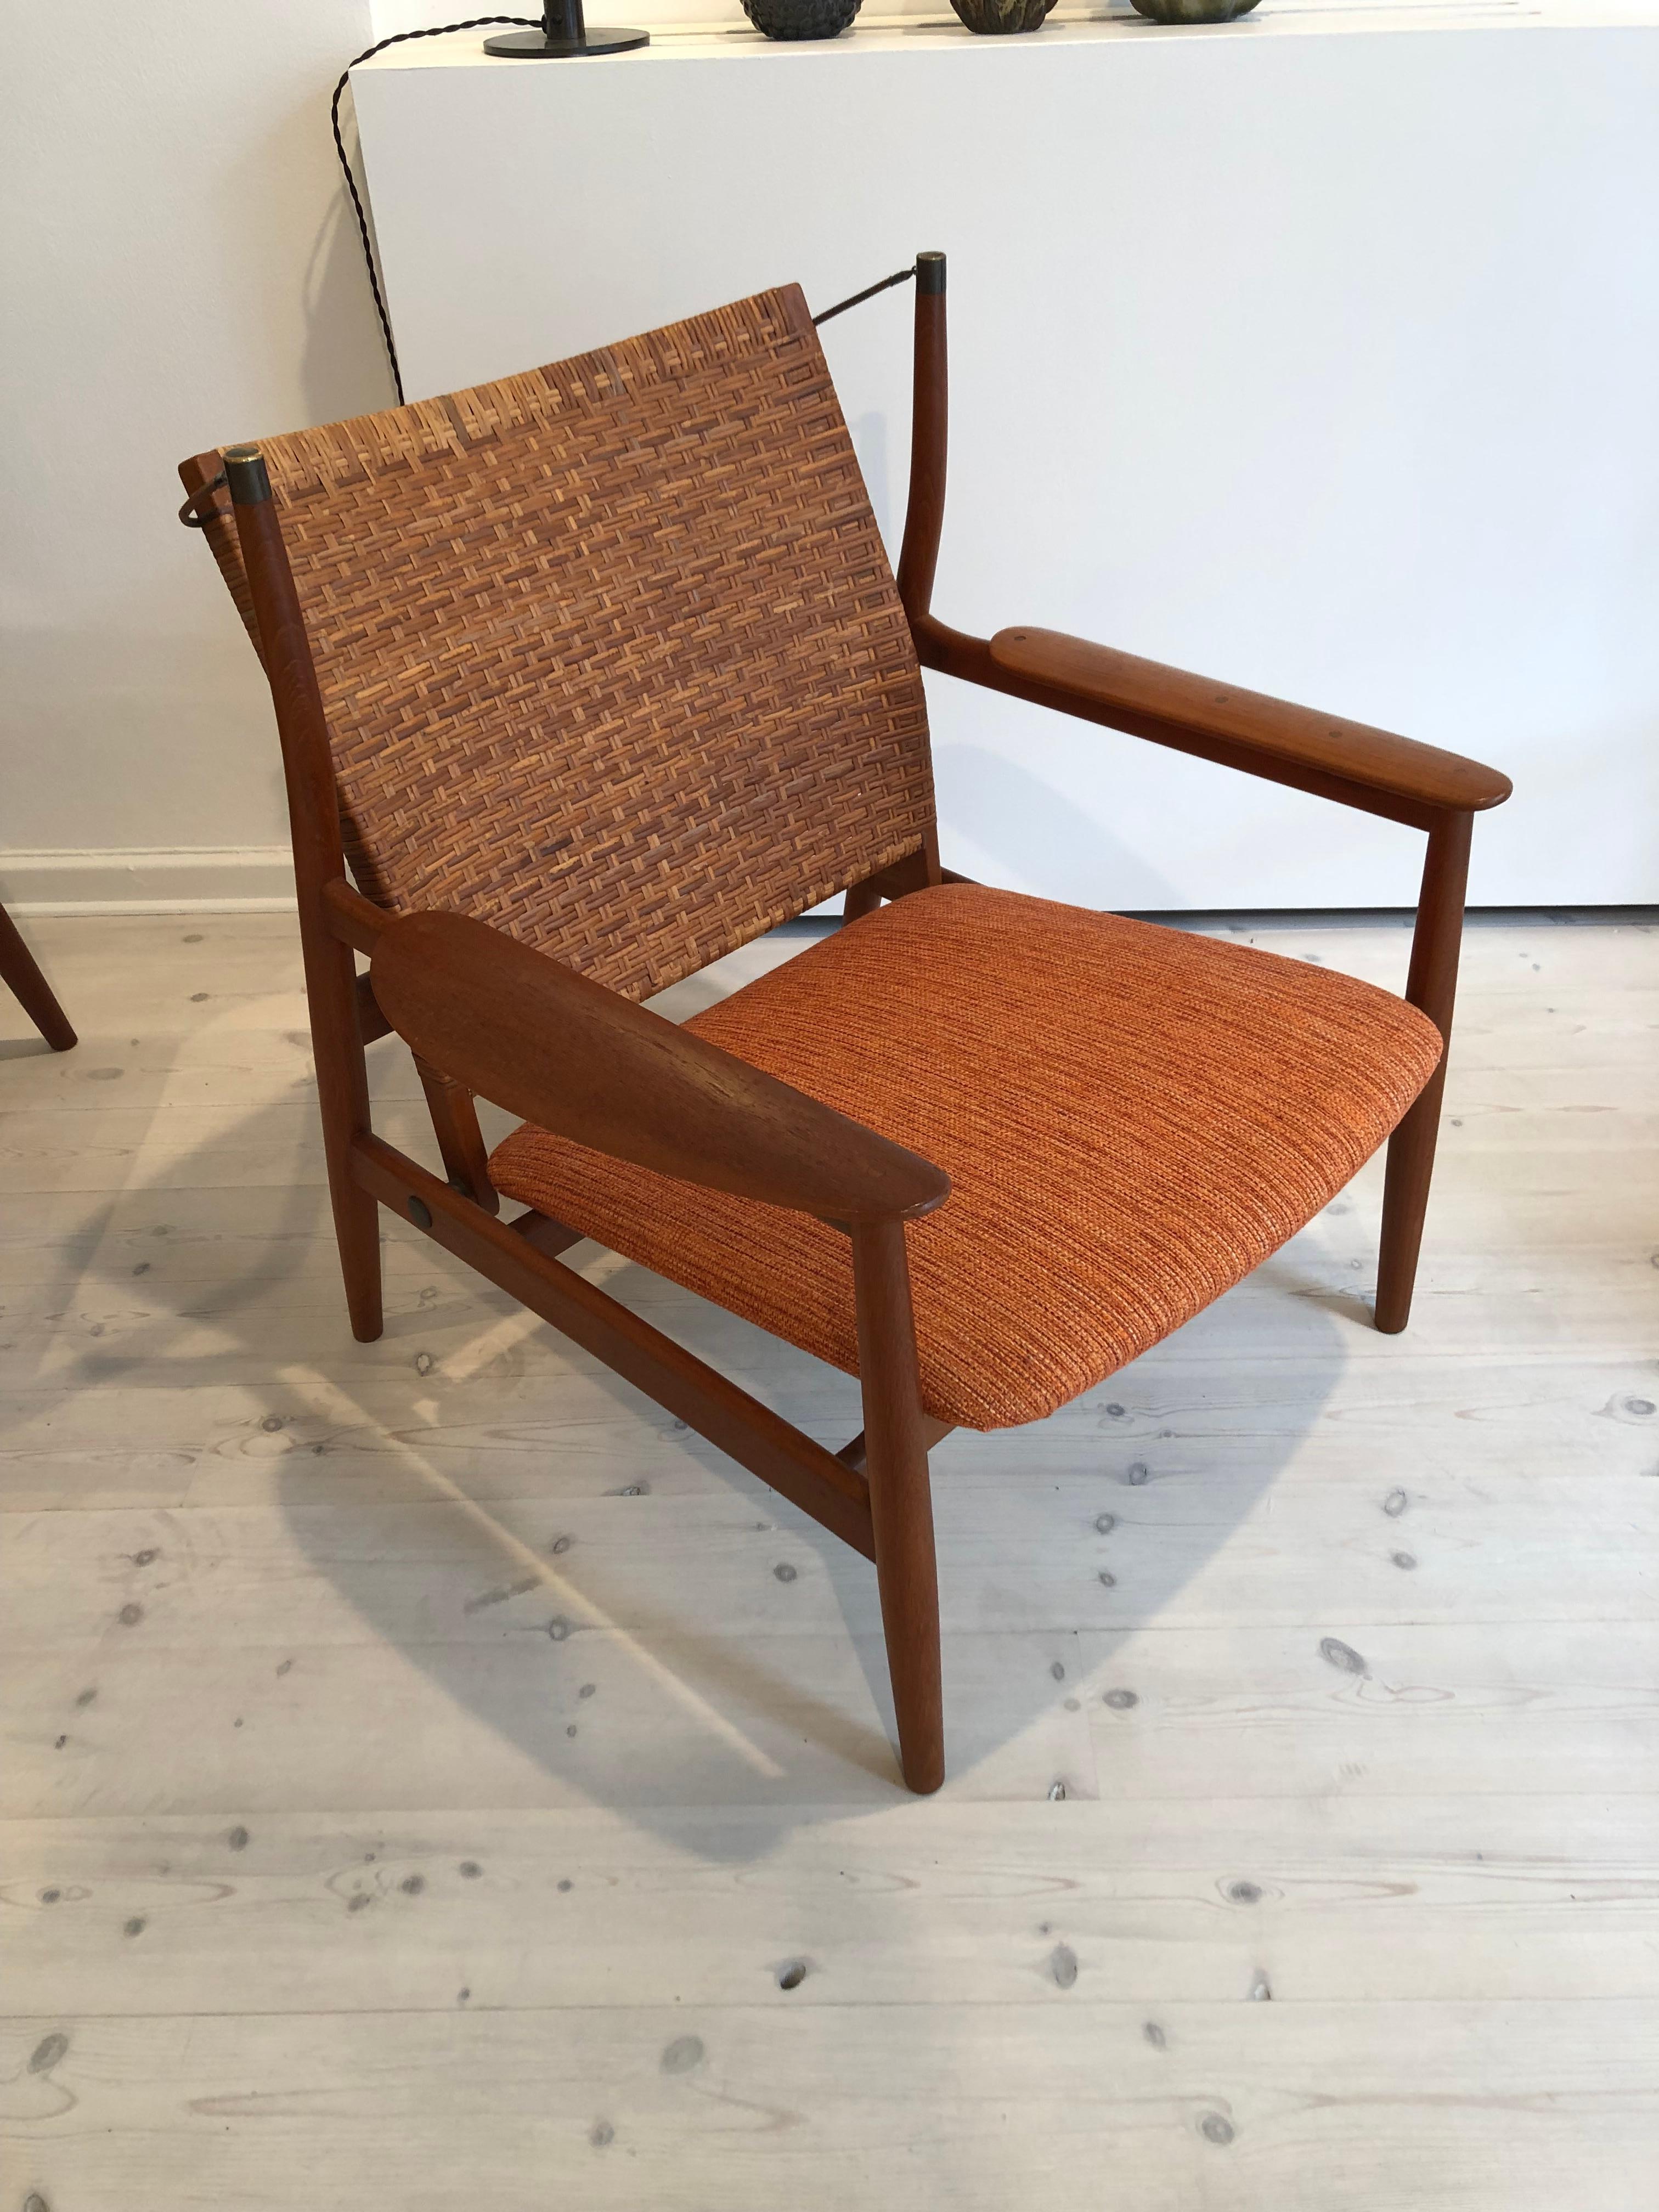 Finn Juhl Rare Pair of NV55 Armchairs in Teak and Cane for Niels Vodder, 1955 3